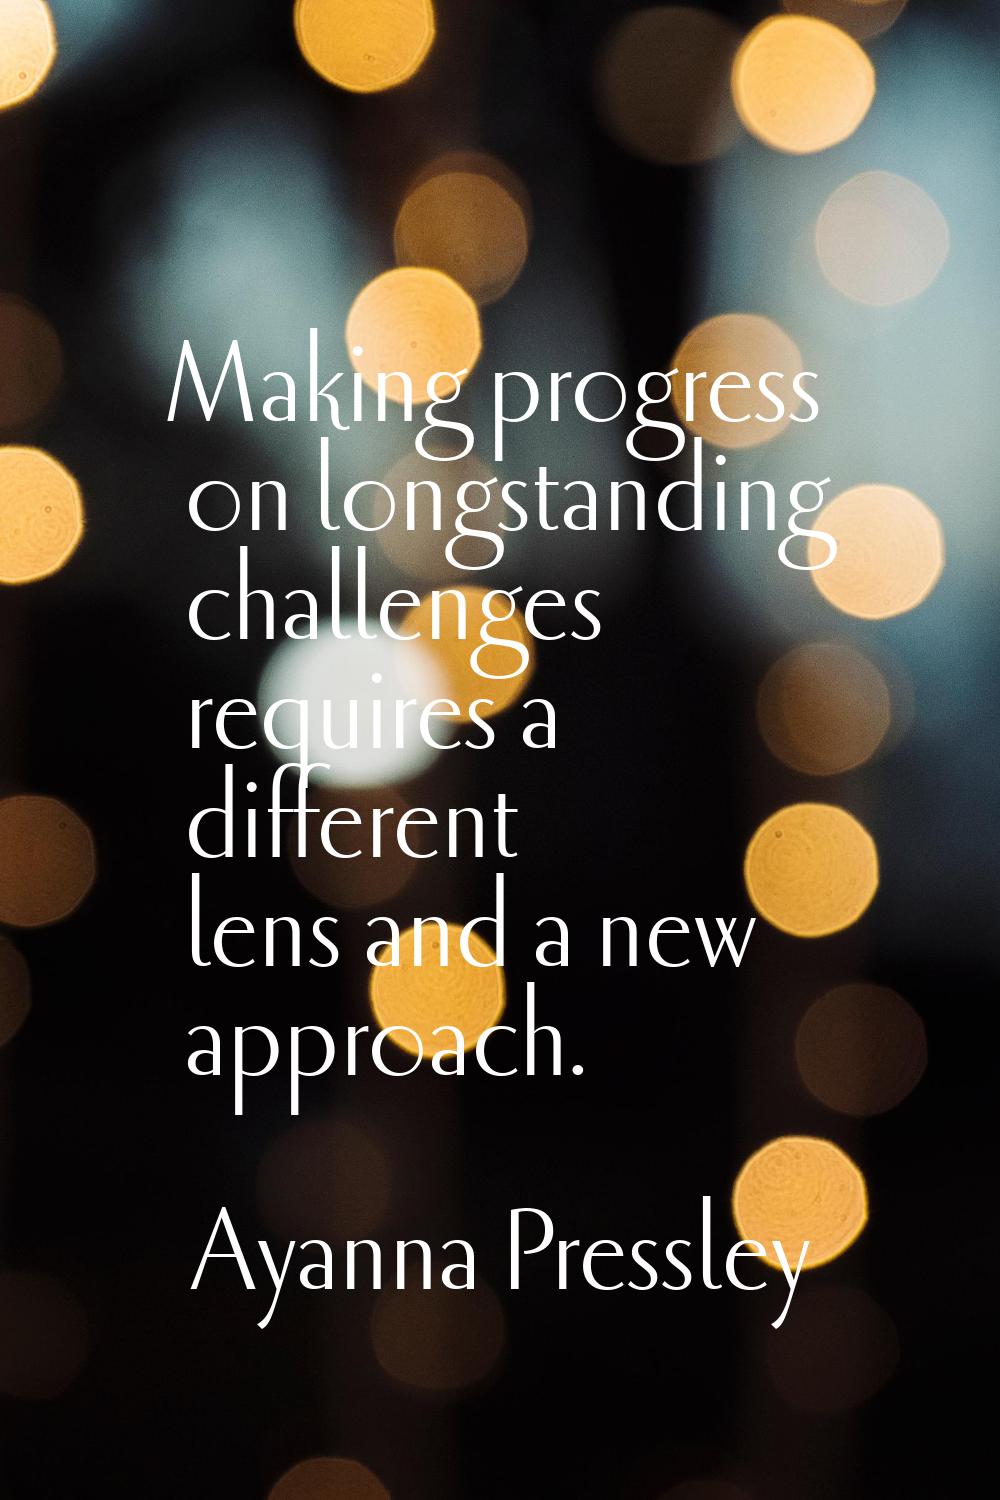 Making progress on longstanding challenges requires a different lens and a new approach.